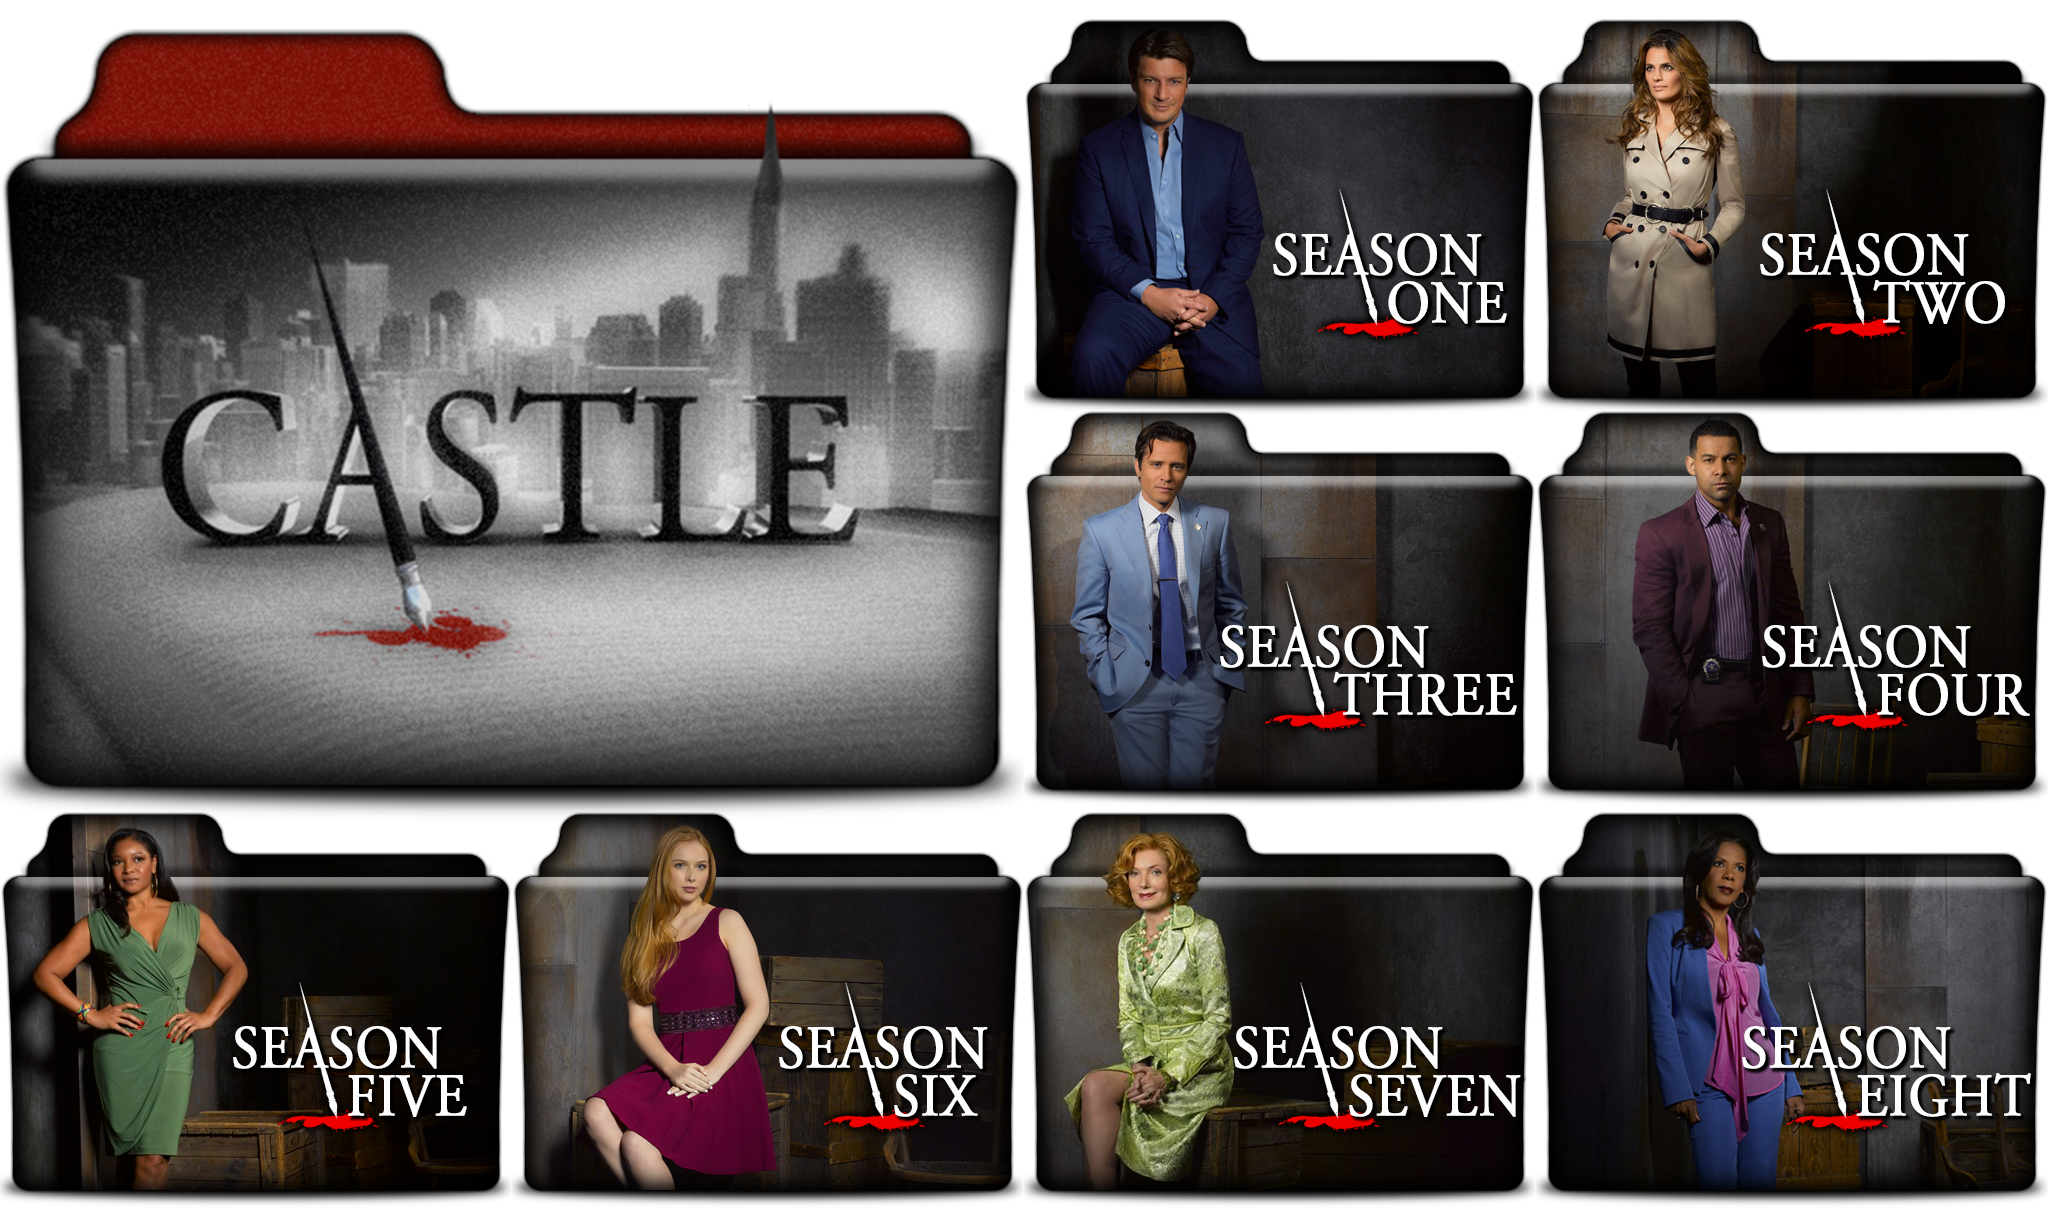 Castle TV Show Folders in PNG and ICO by vikkipoe24 on DeviantArt2048 x 1226